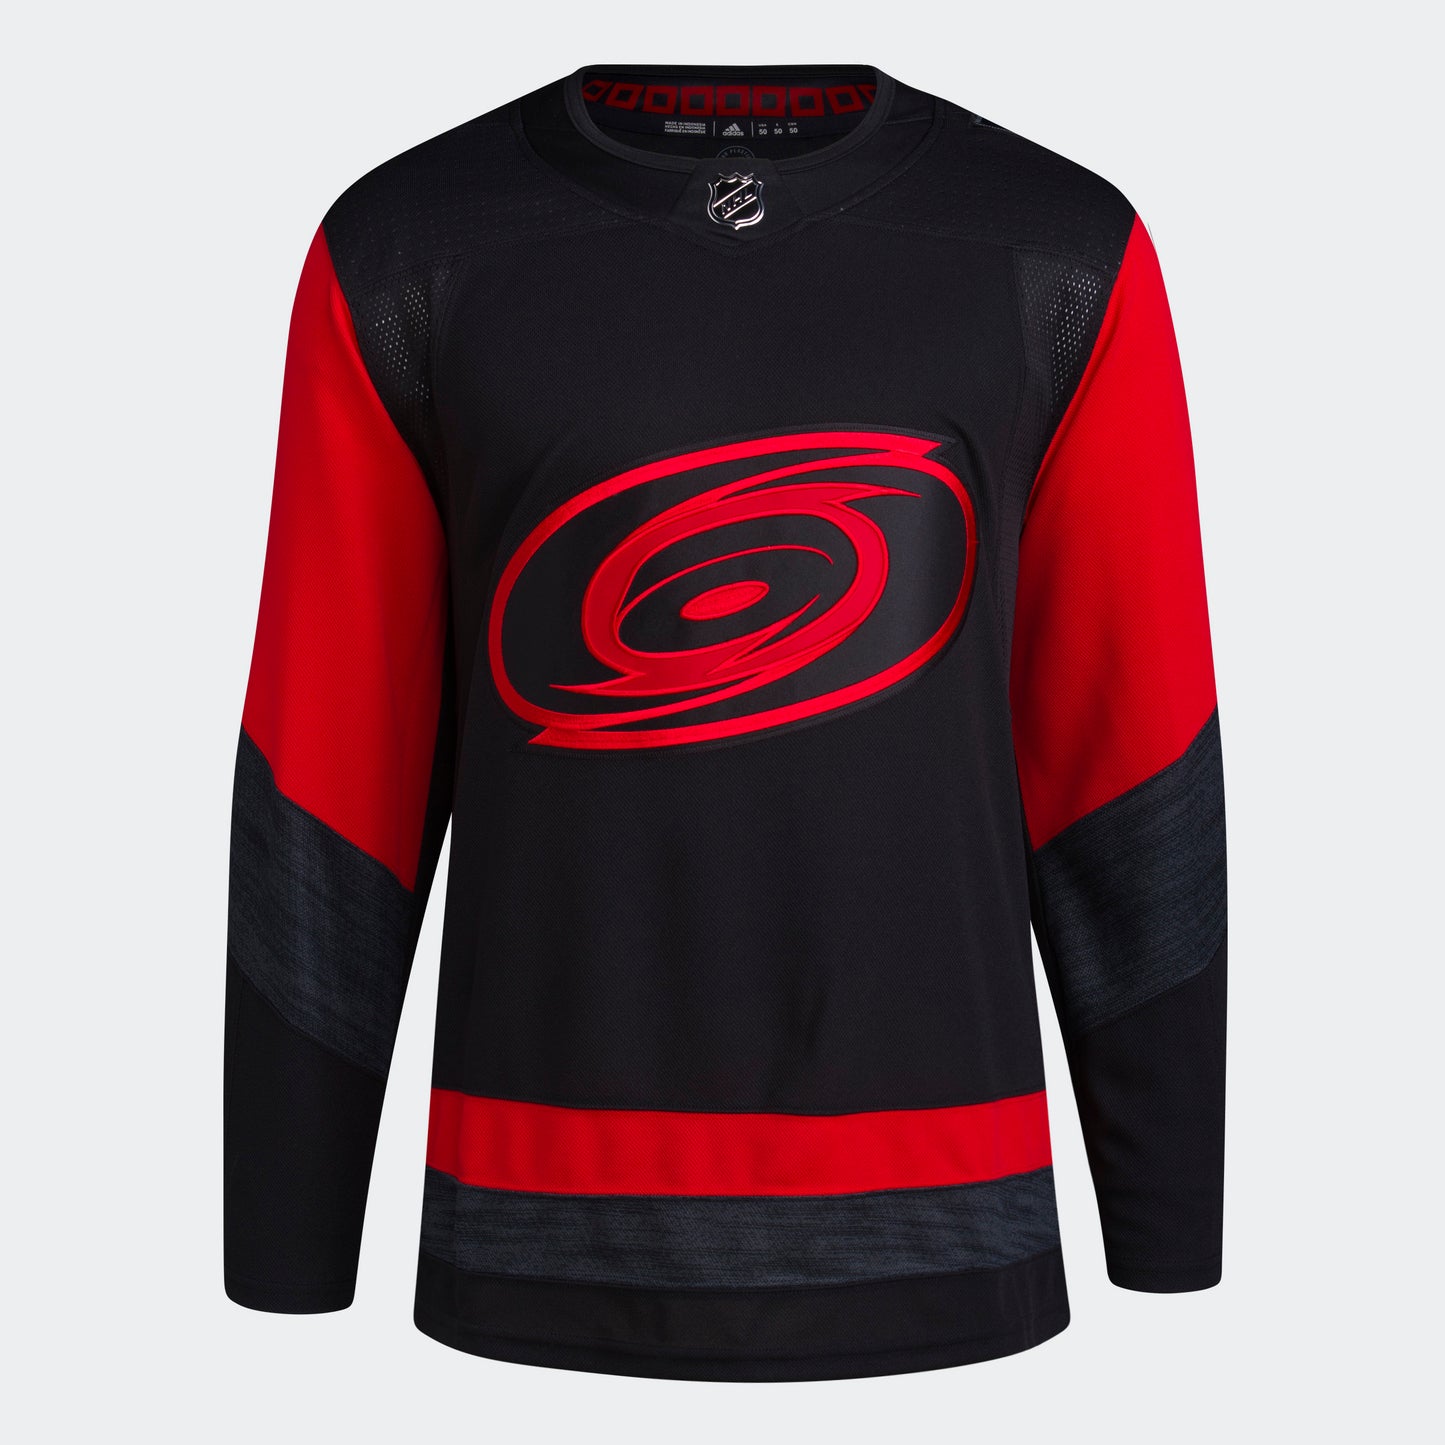 Front View: Stadium Series Black and red jersey with black and red Hurricanes logo